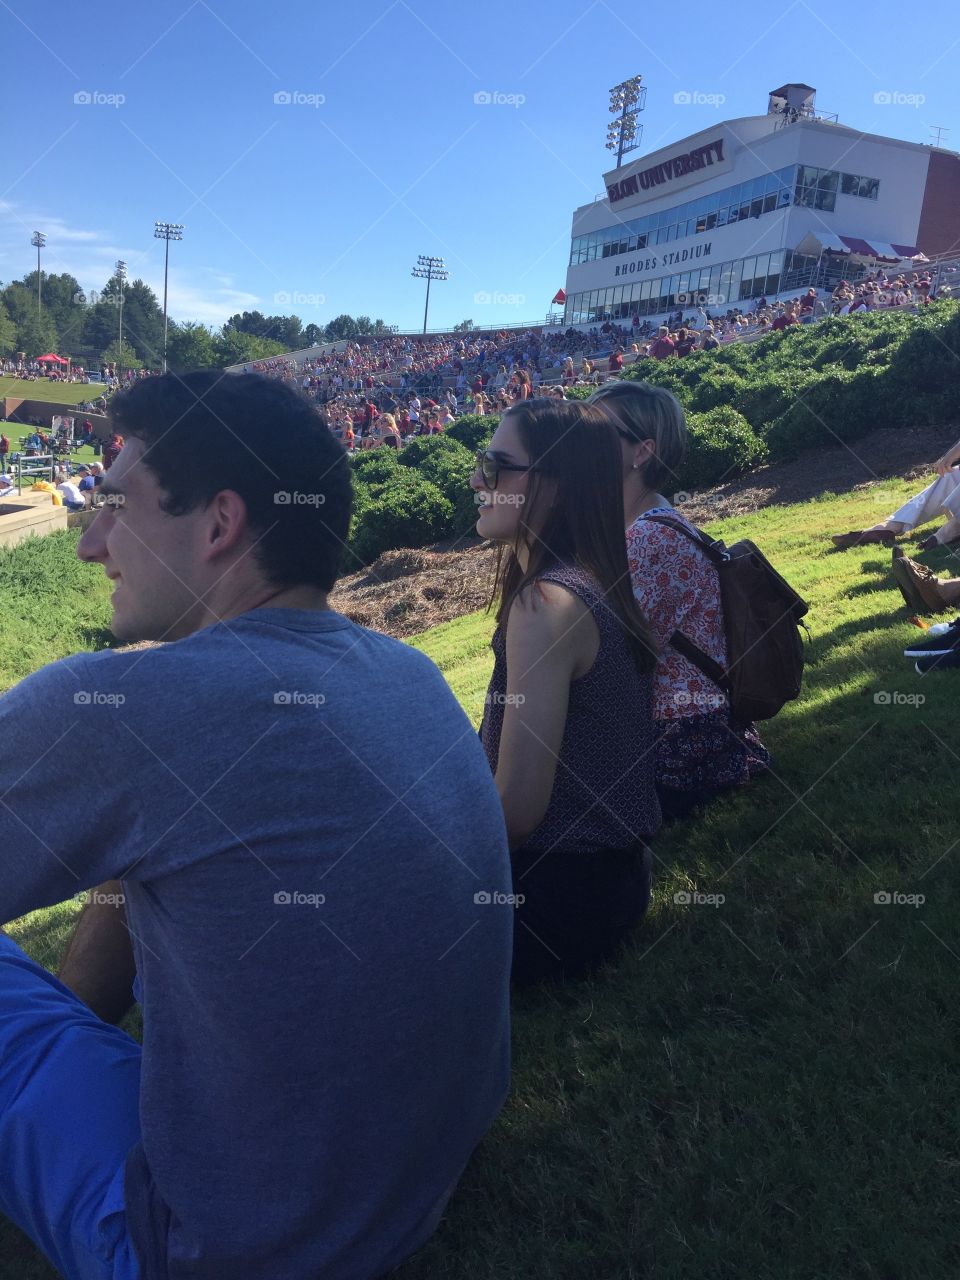 Fall football game college watching from grassy area friends side view 